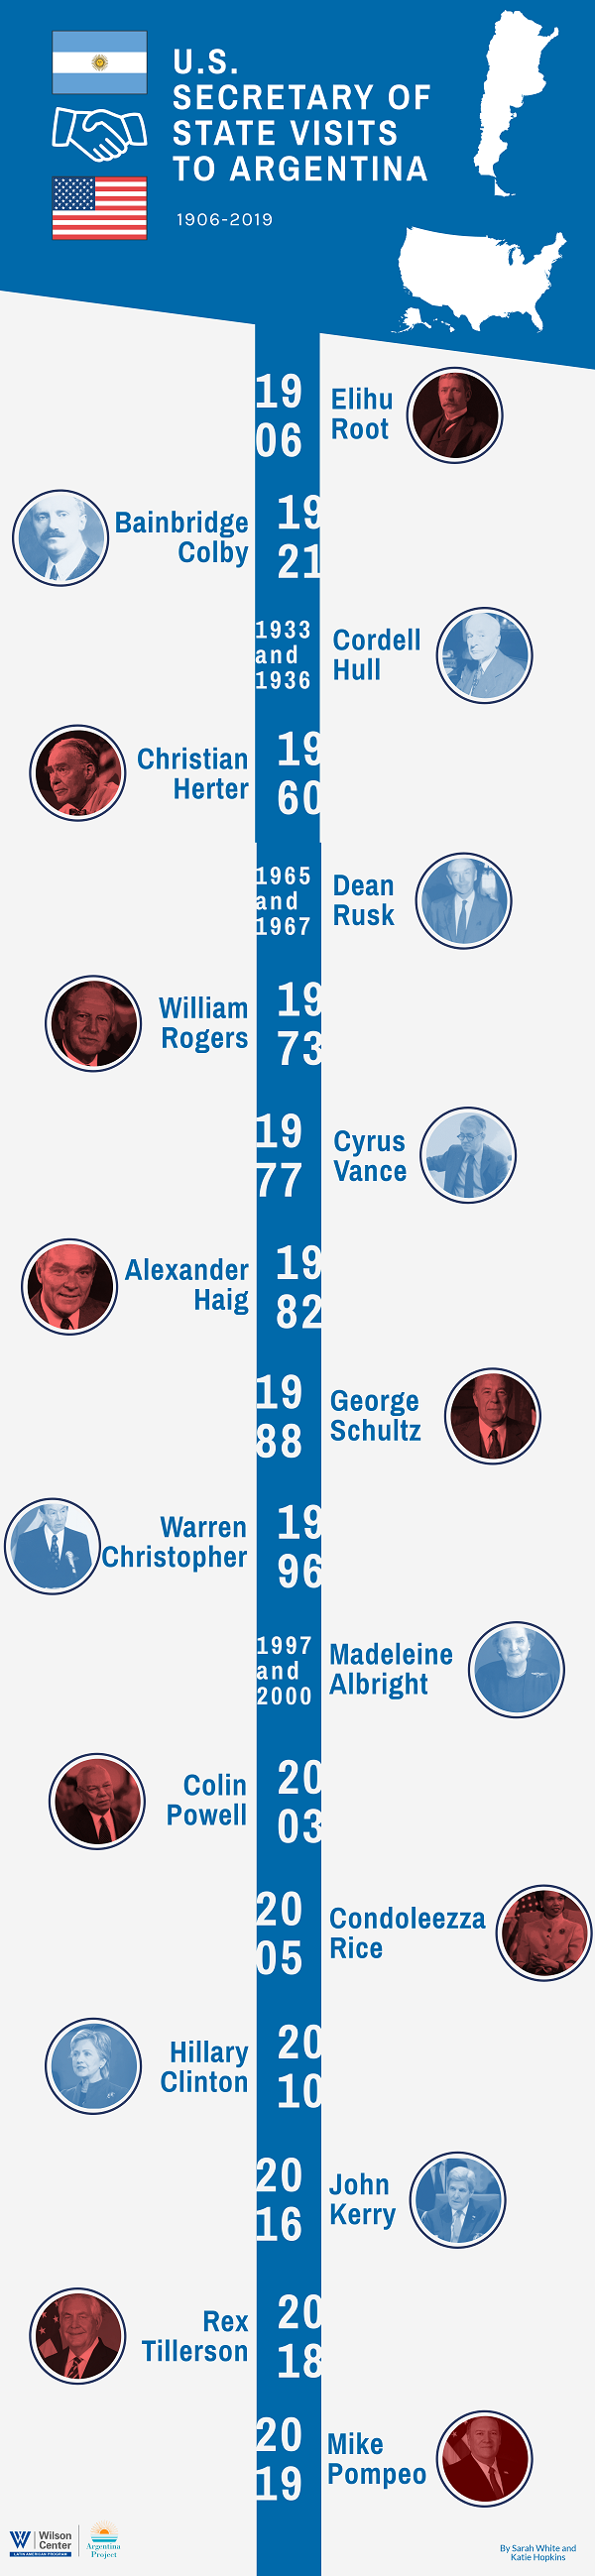 Infographic- History of U.S. Secretary of State Visits to Argentina